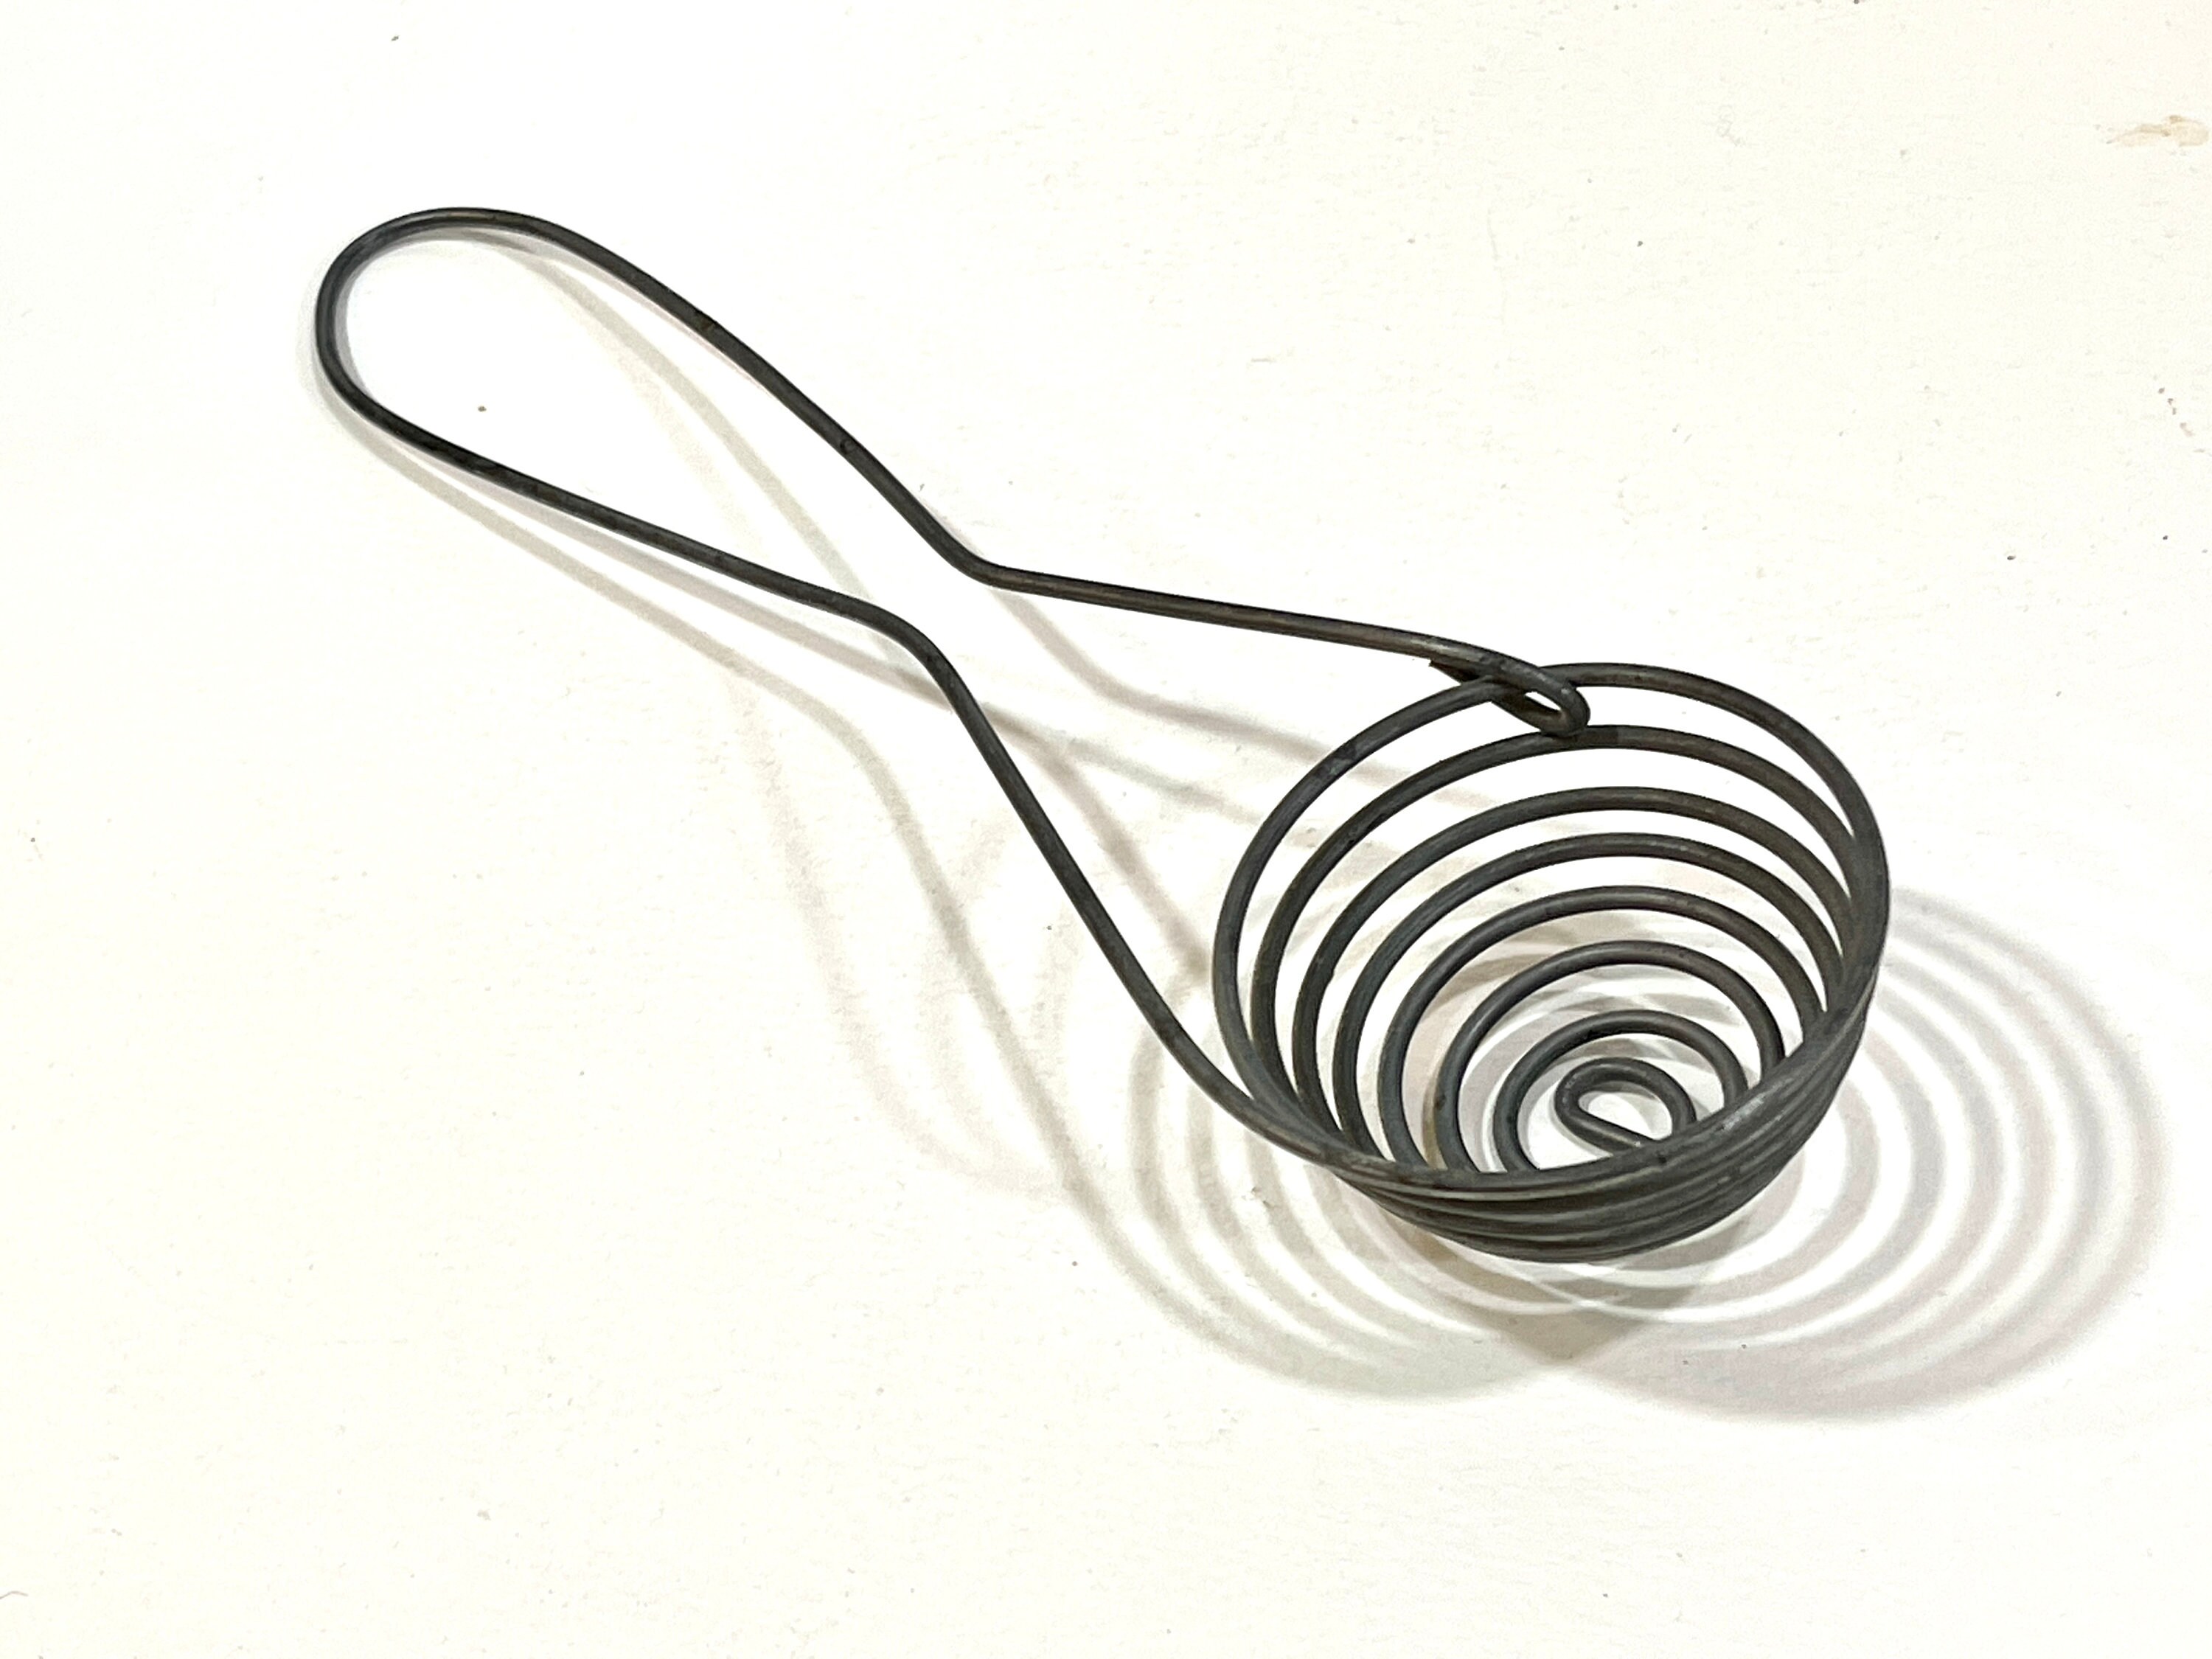 Vtg Metal Spiral Coiled Wire Whisk Egg Beater Stainless Steel 9